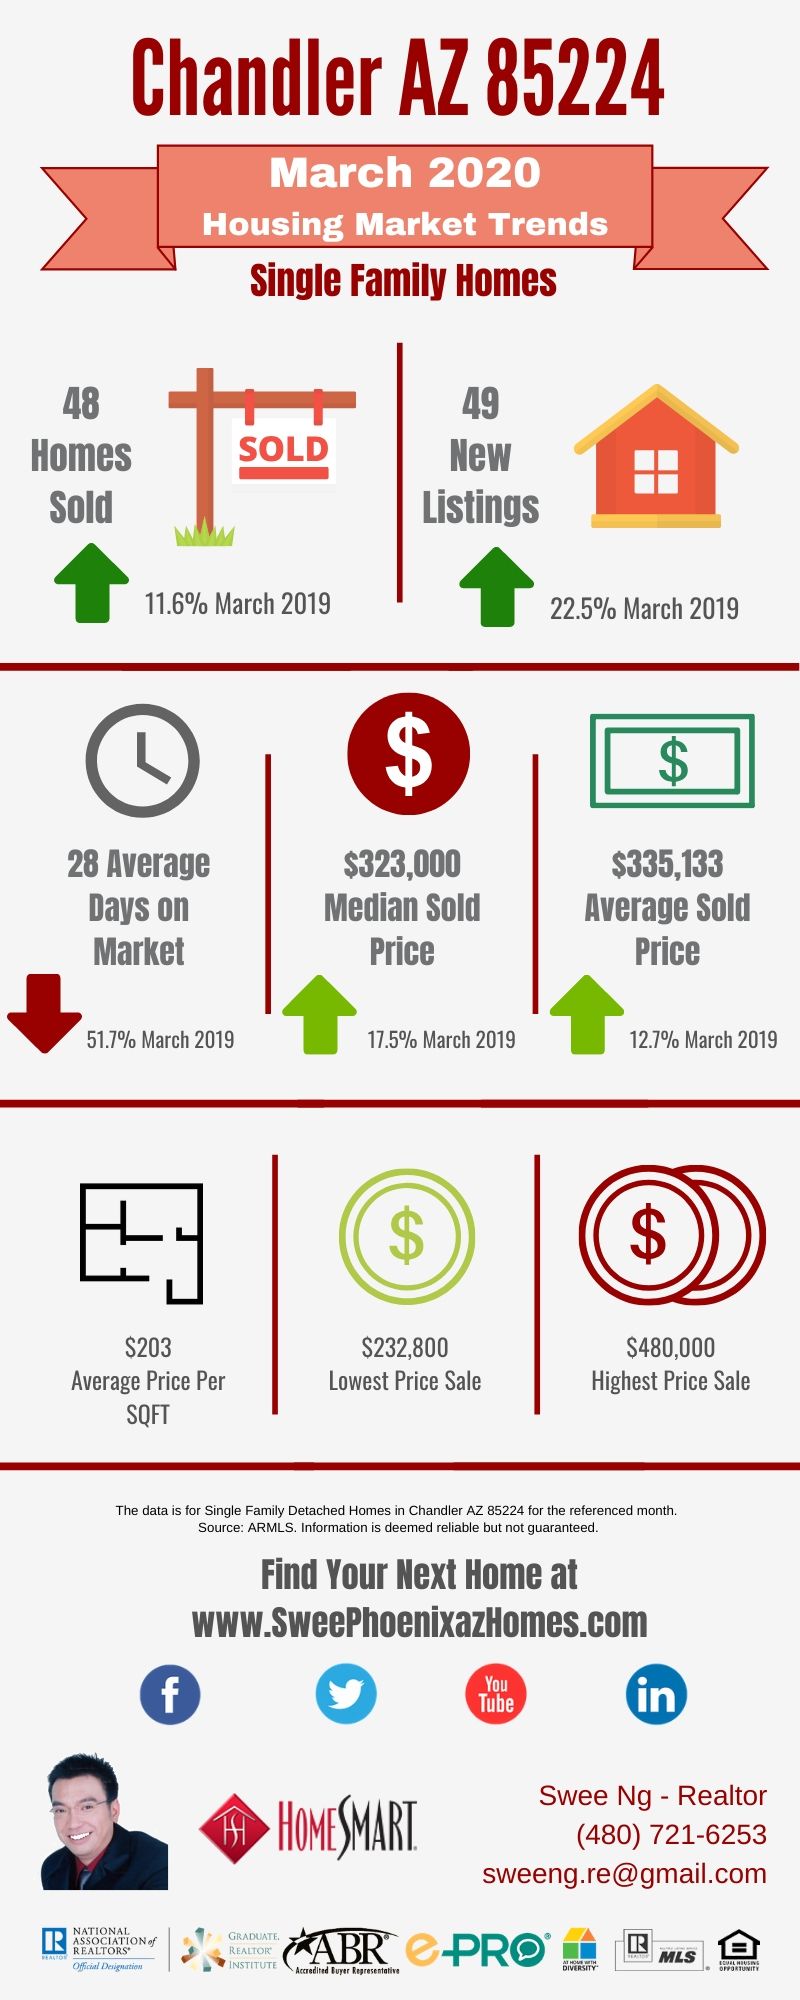 Chandler AZ 85224 Housing Market Trends Report March 2020, House Value, Real Estate and Statistic by Swee Ng